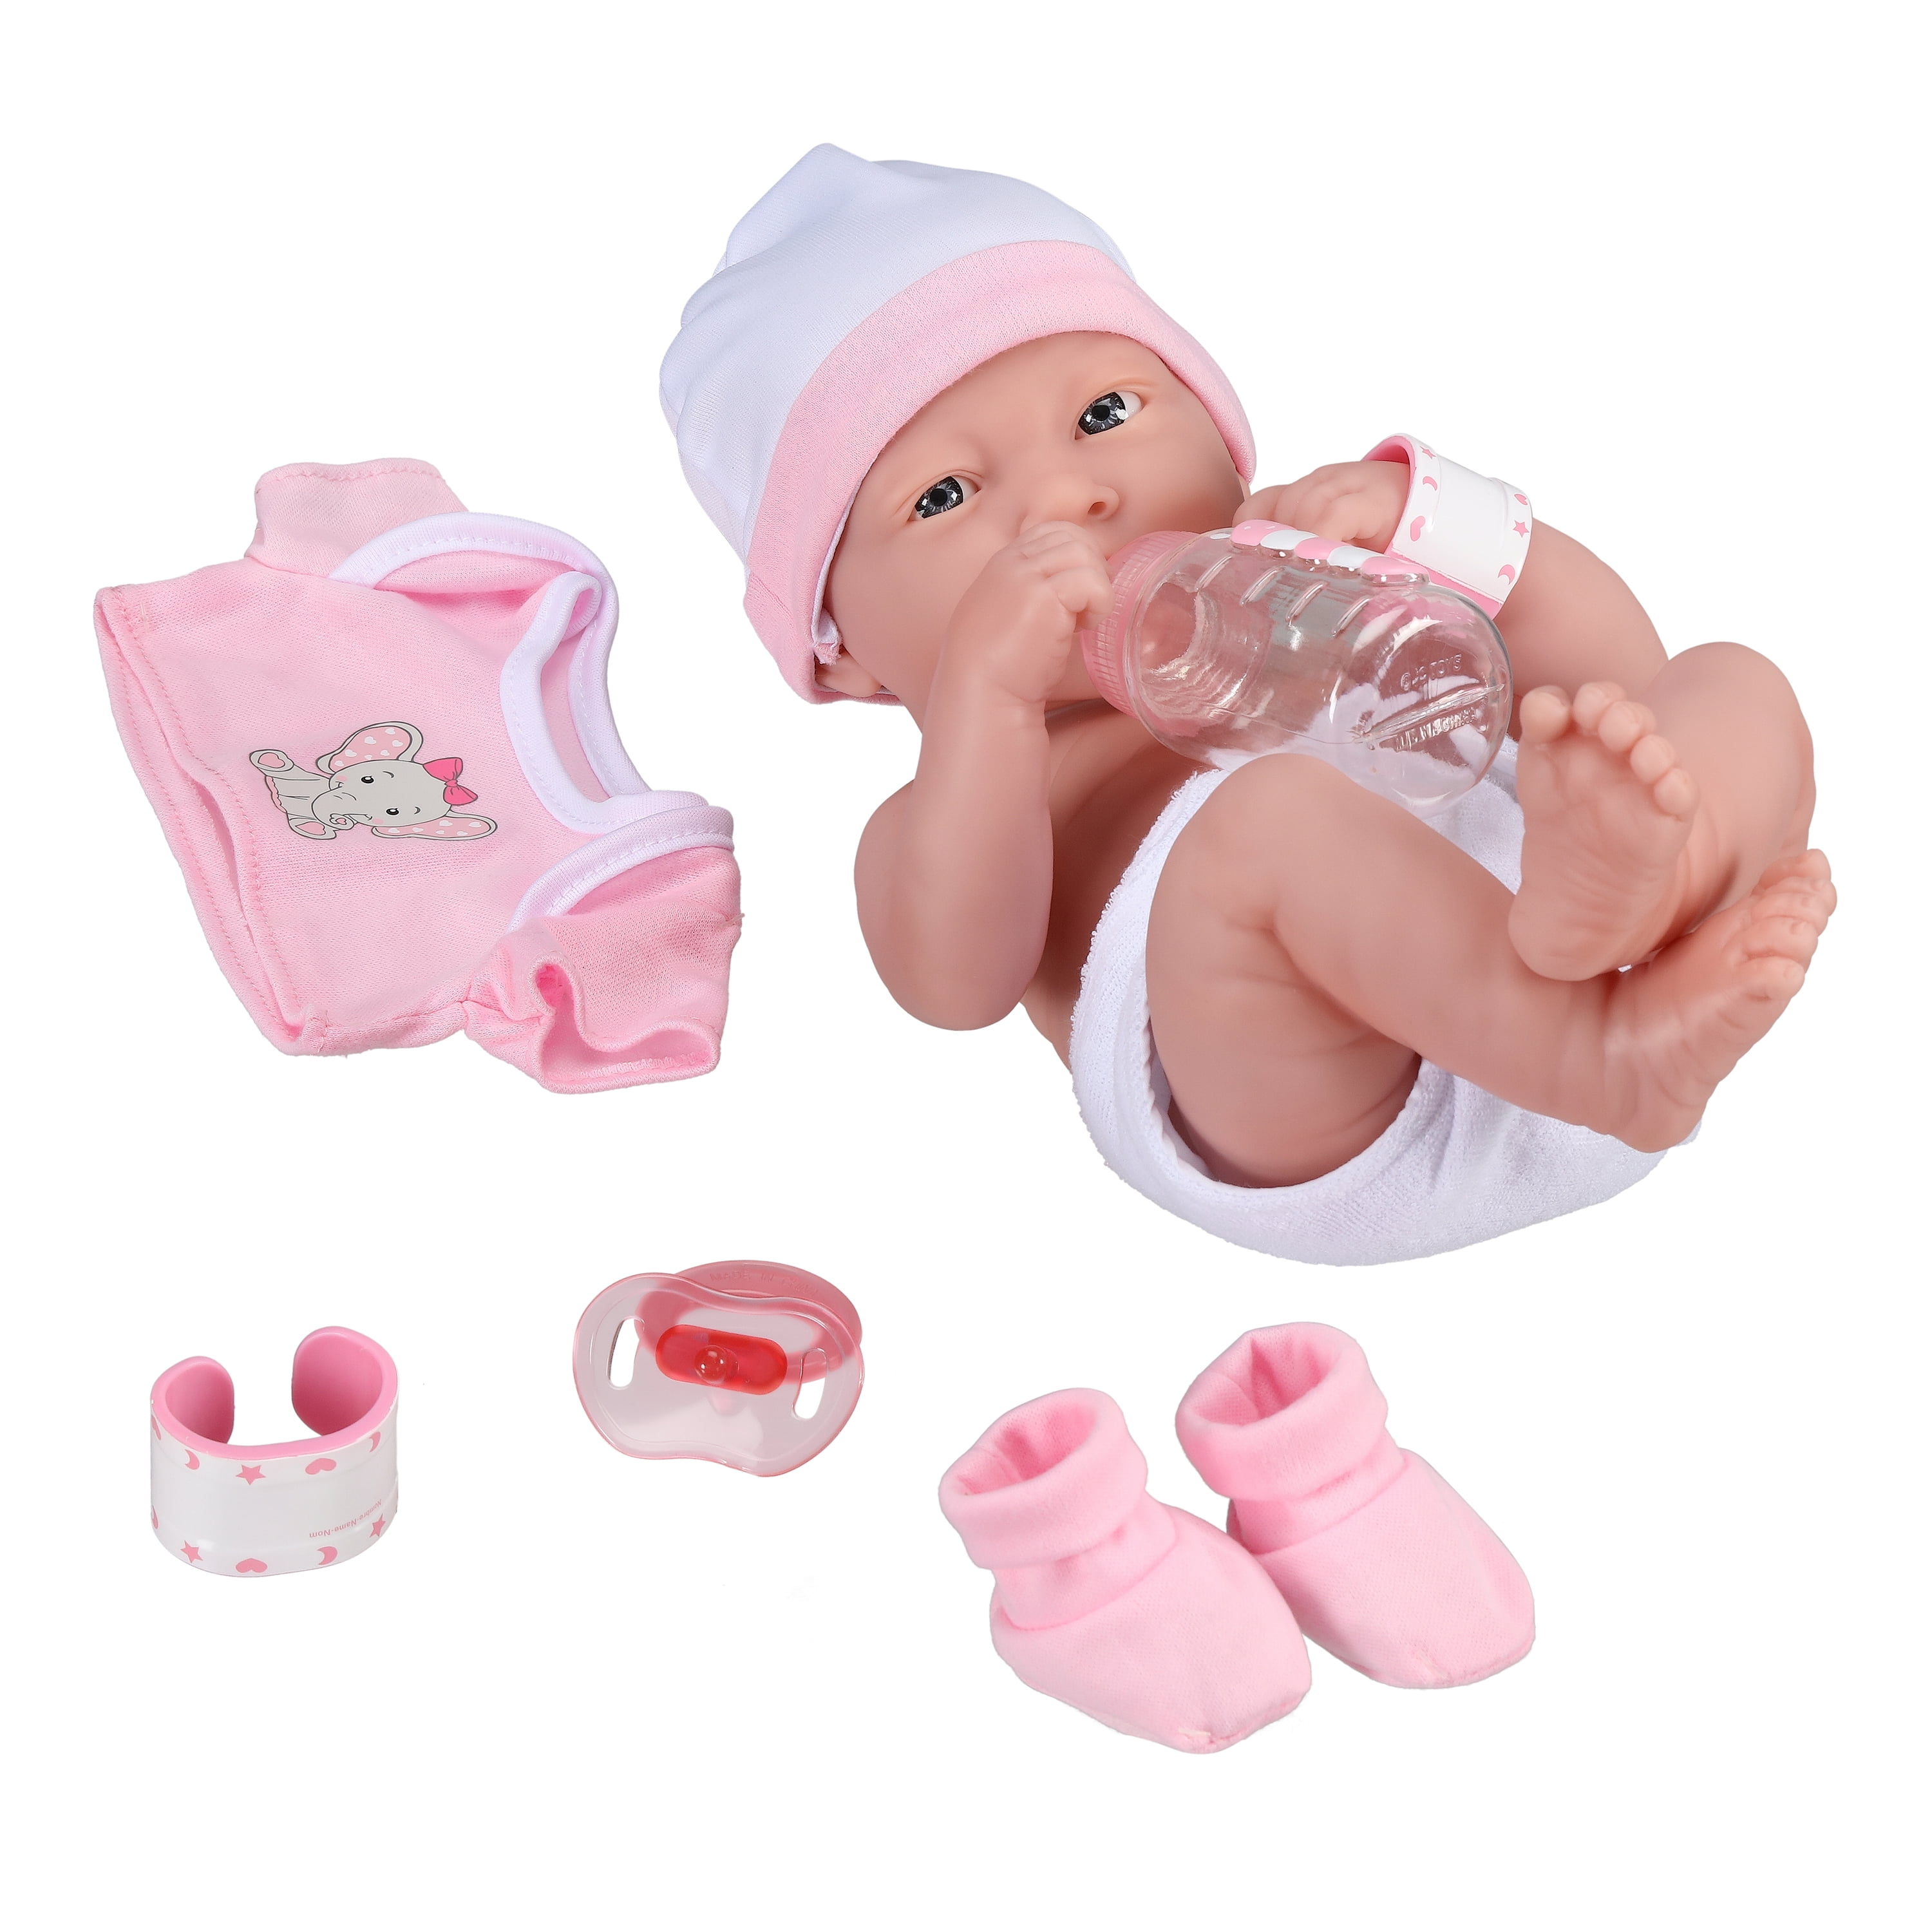 You & Me Baby Doll 14 Inch Pink With Keepsake Basket Set and Clothes Caucasian for sale online 